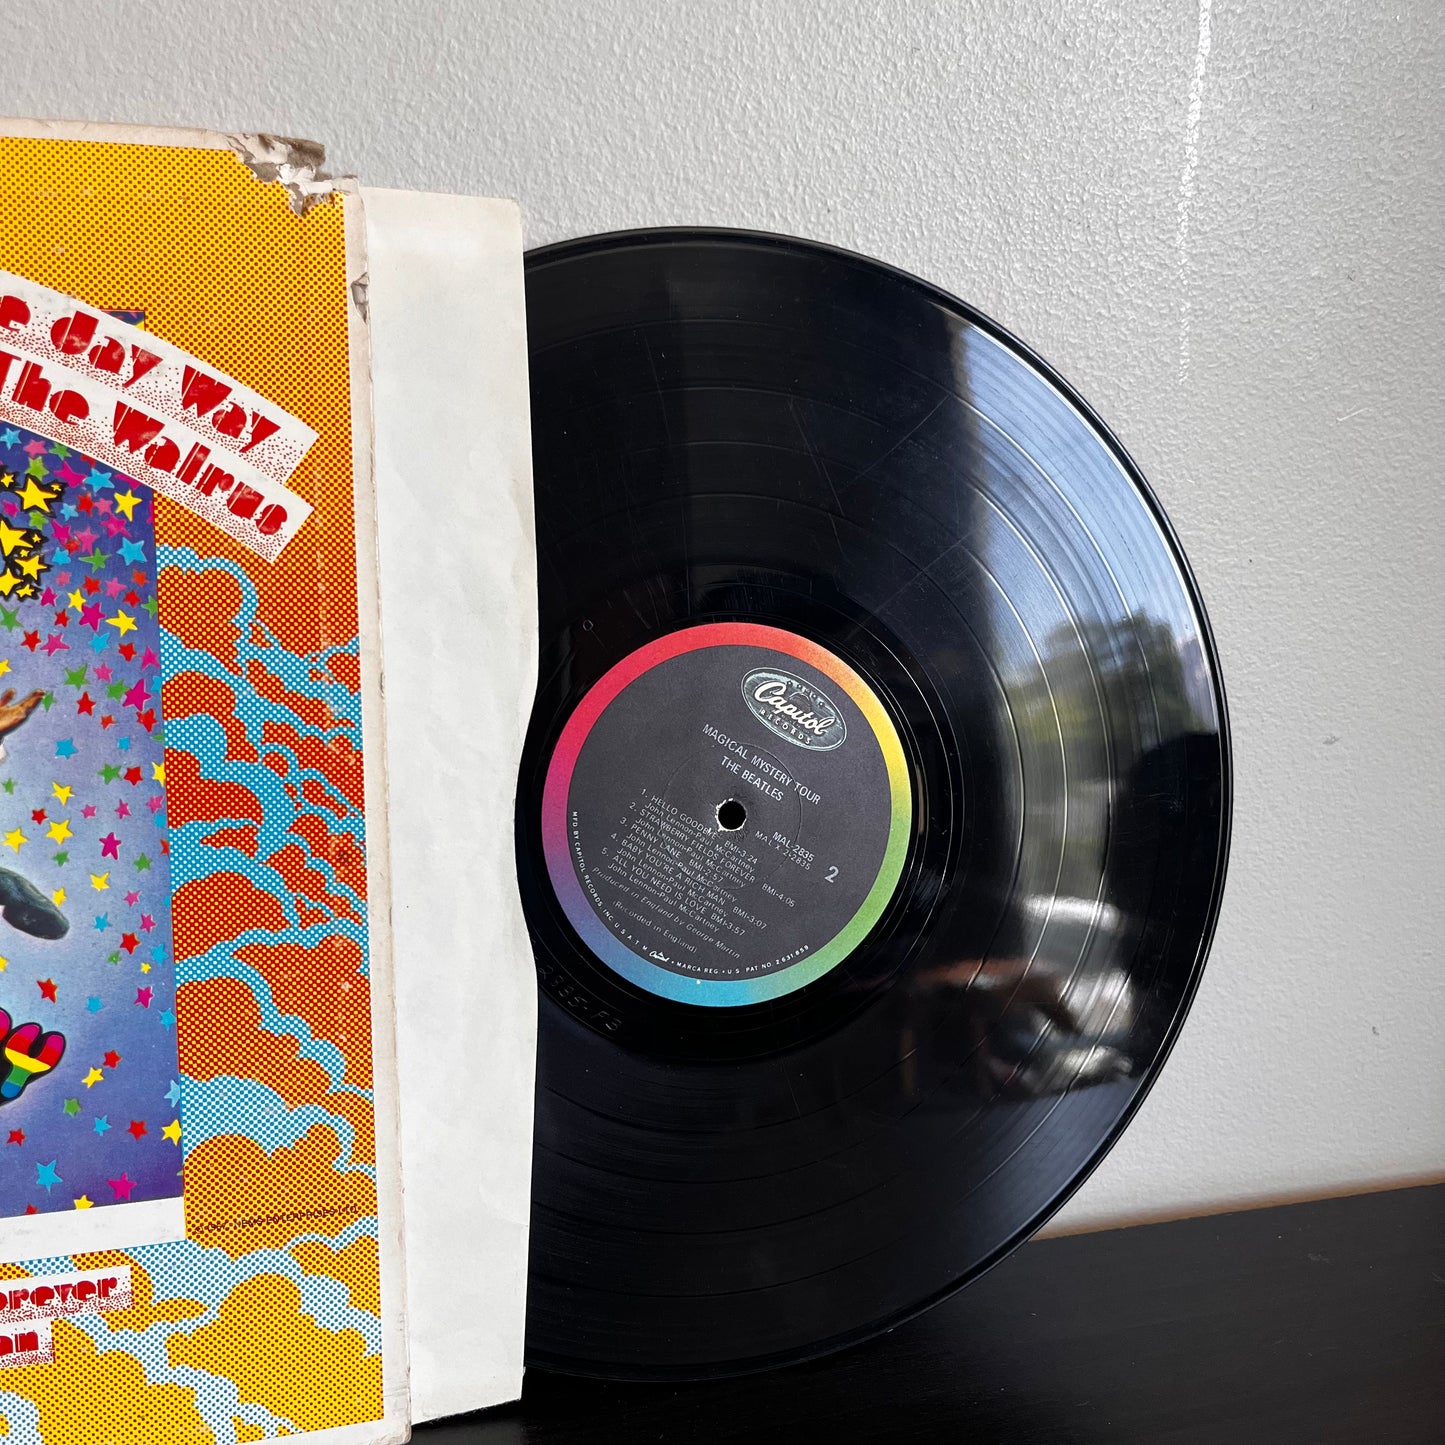 Magical Mystery Tour - The Beatles Picture Book 1967 MAL 2835 Used Vinyl VG+